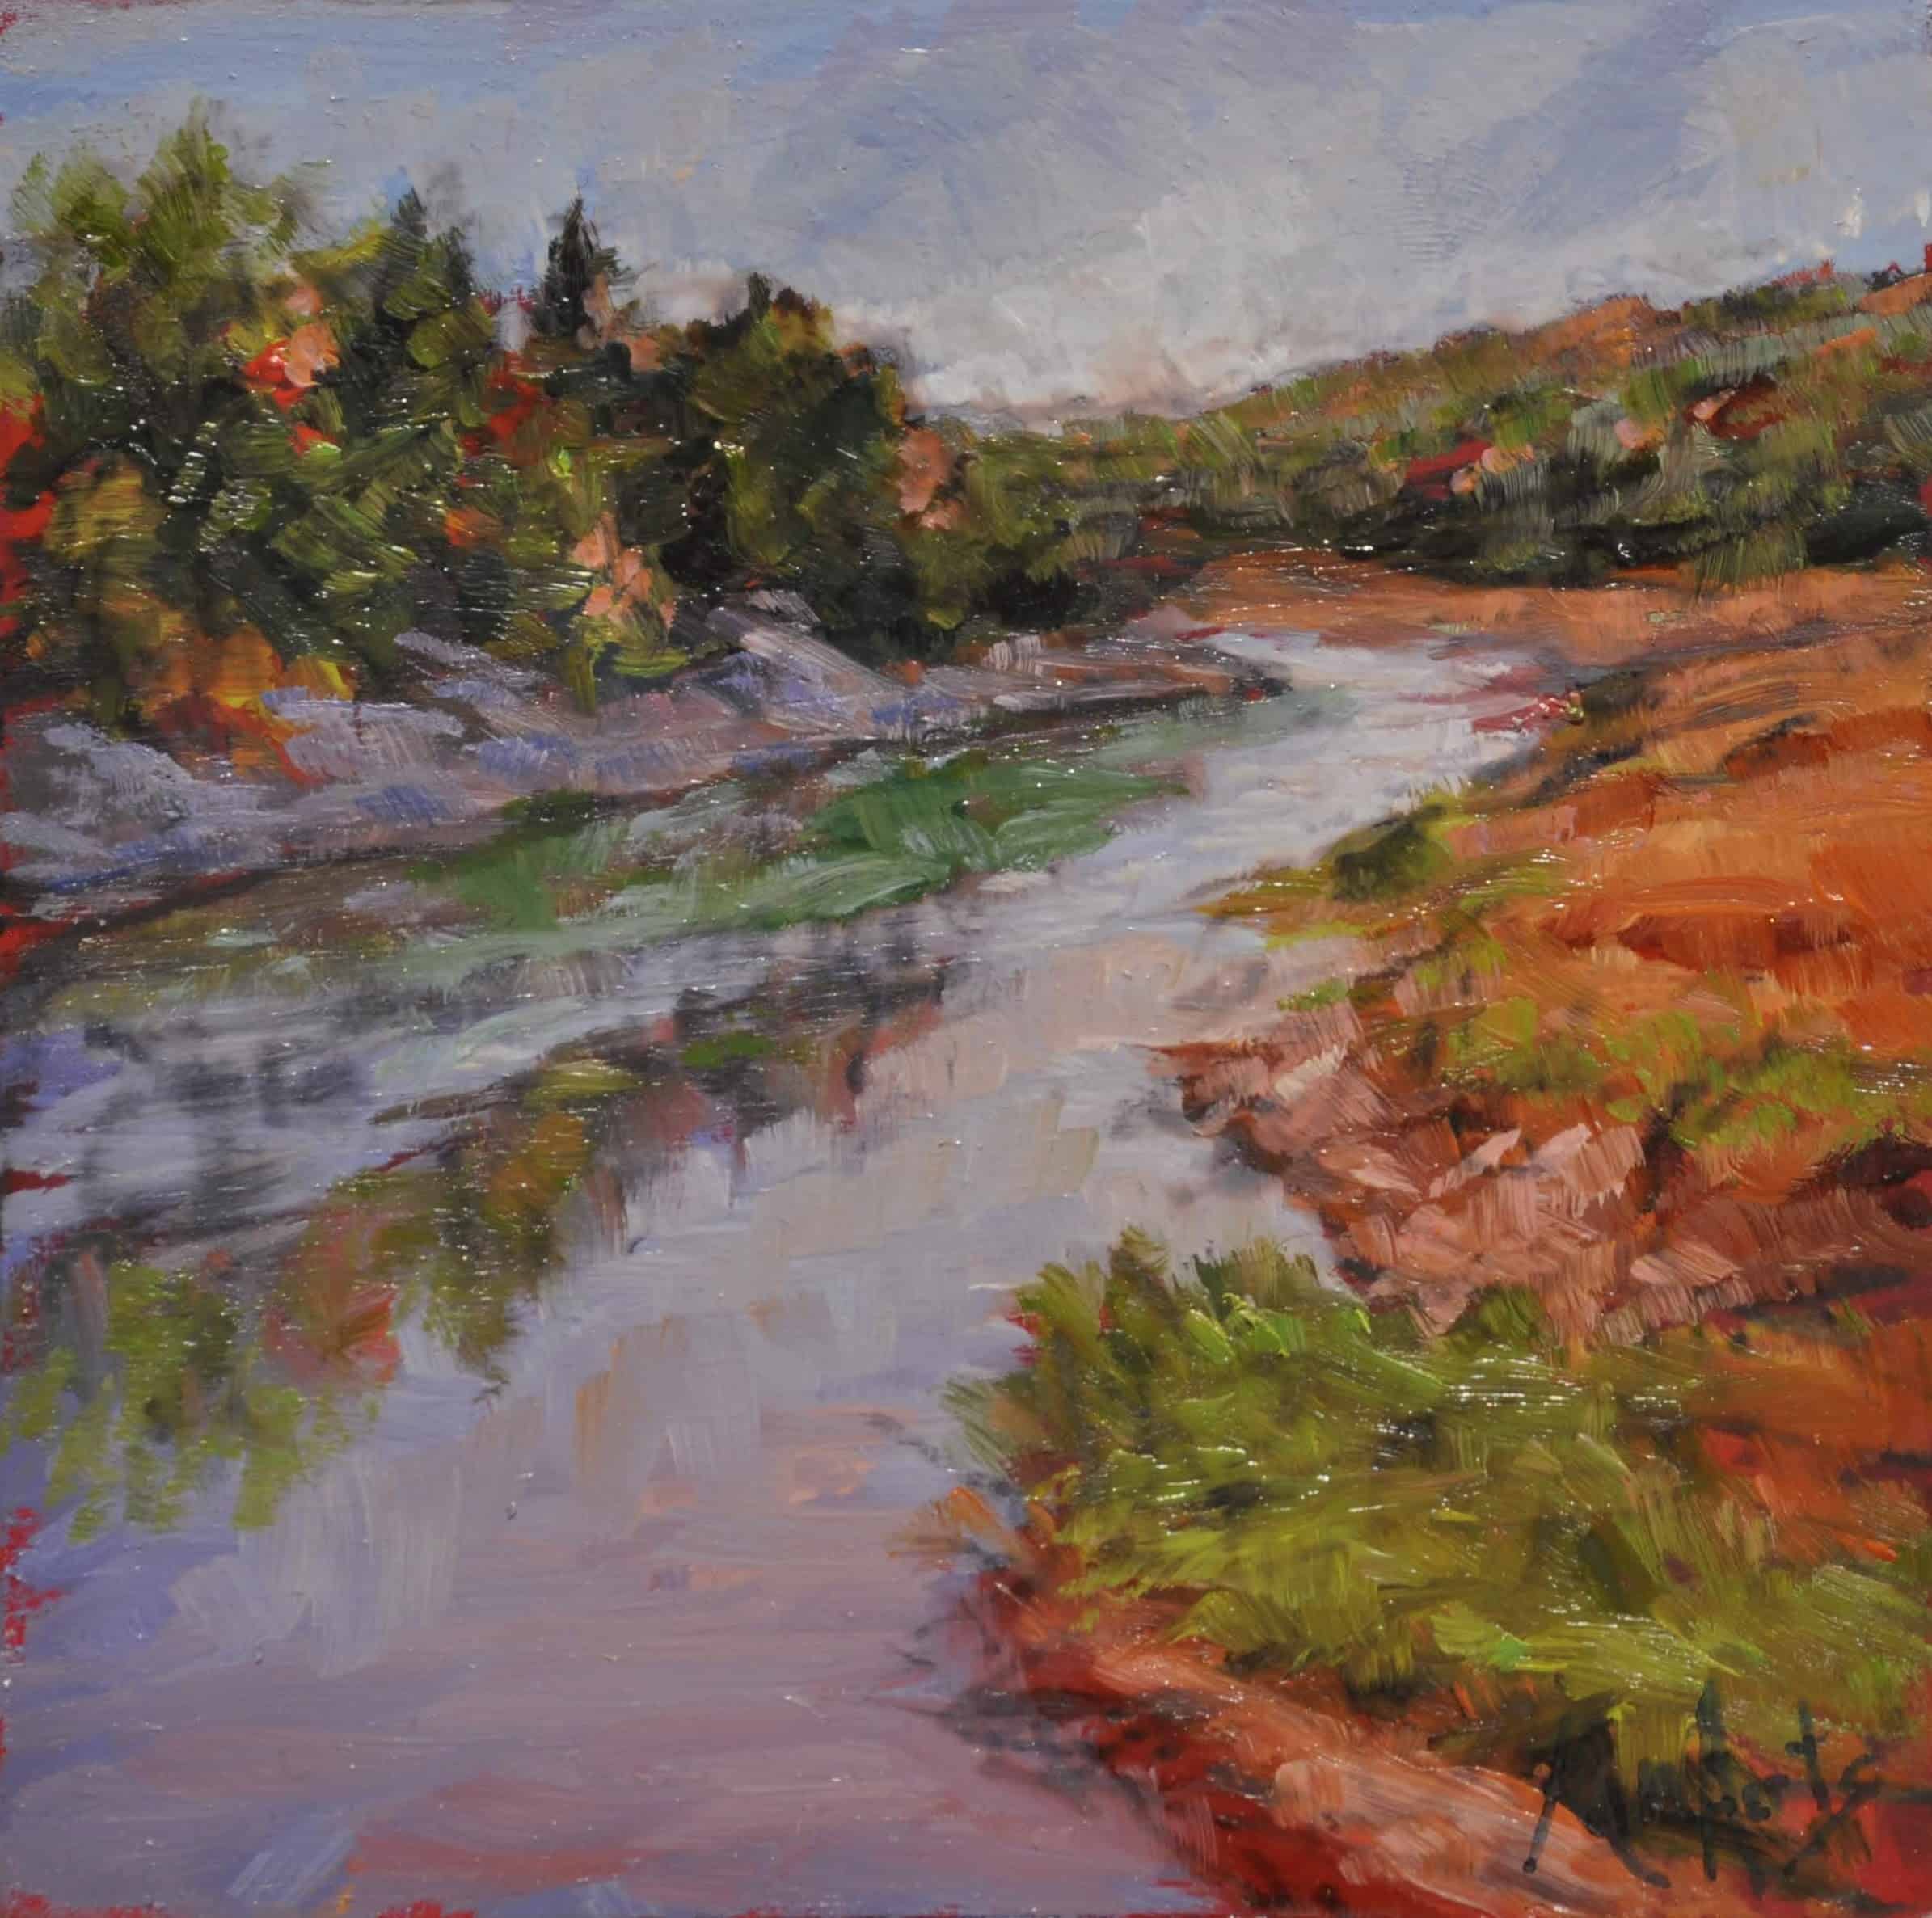 Kim Aerts oil painting - Harrington River Outfall - 4x4 inches